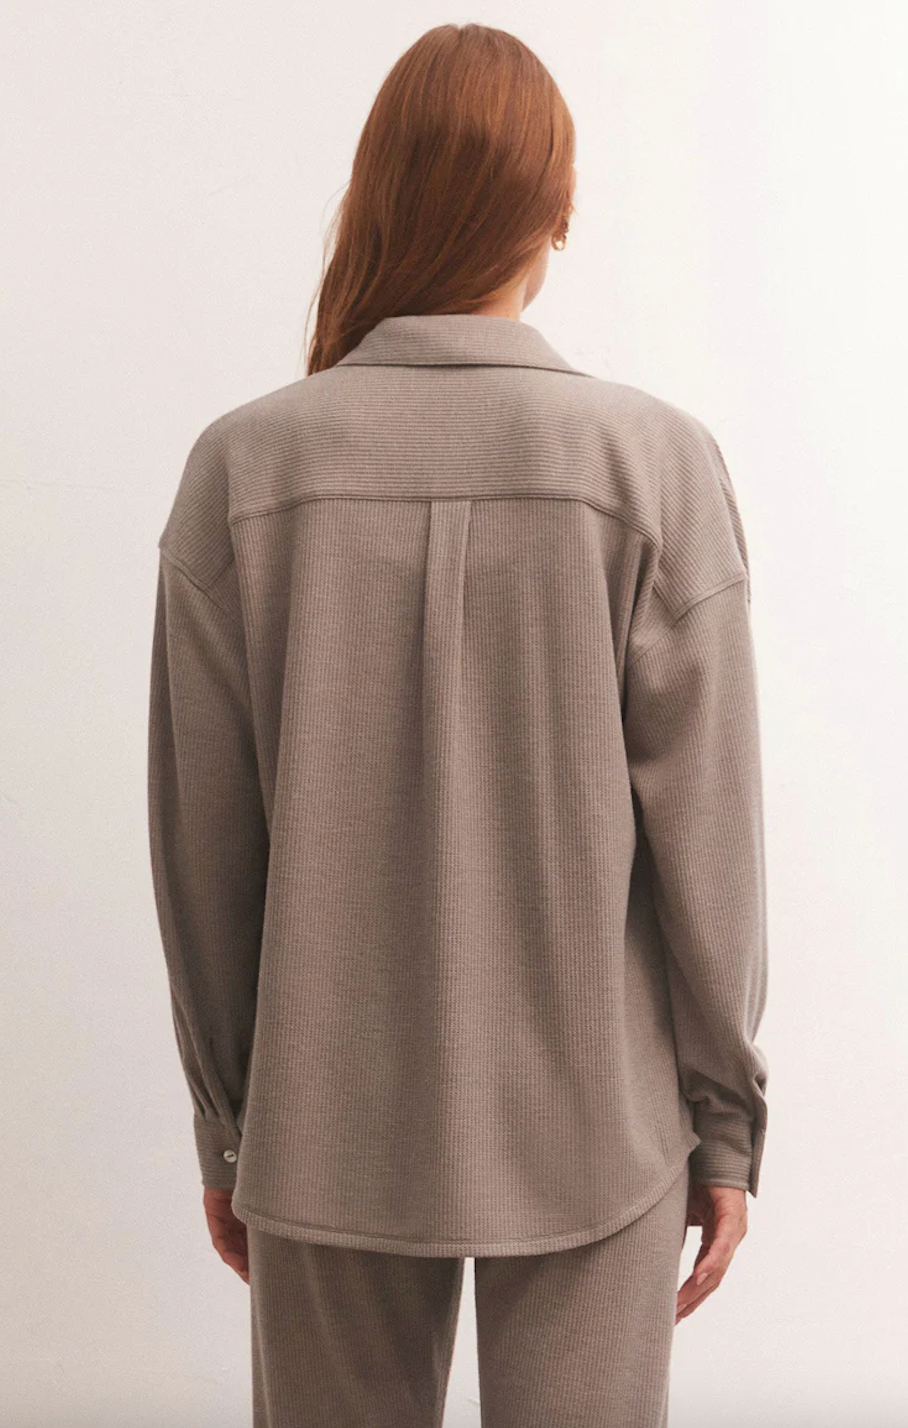 Z SUPPLY COZY DAYS THERMAL SHIRT IN TAUPE STONE